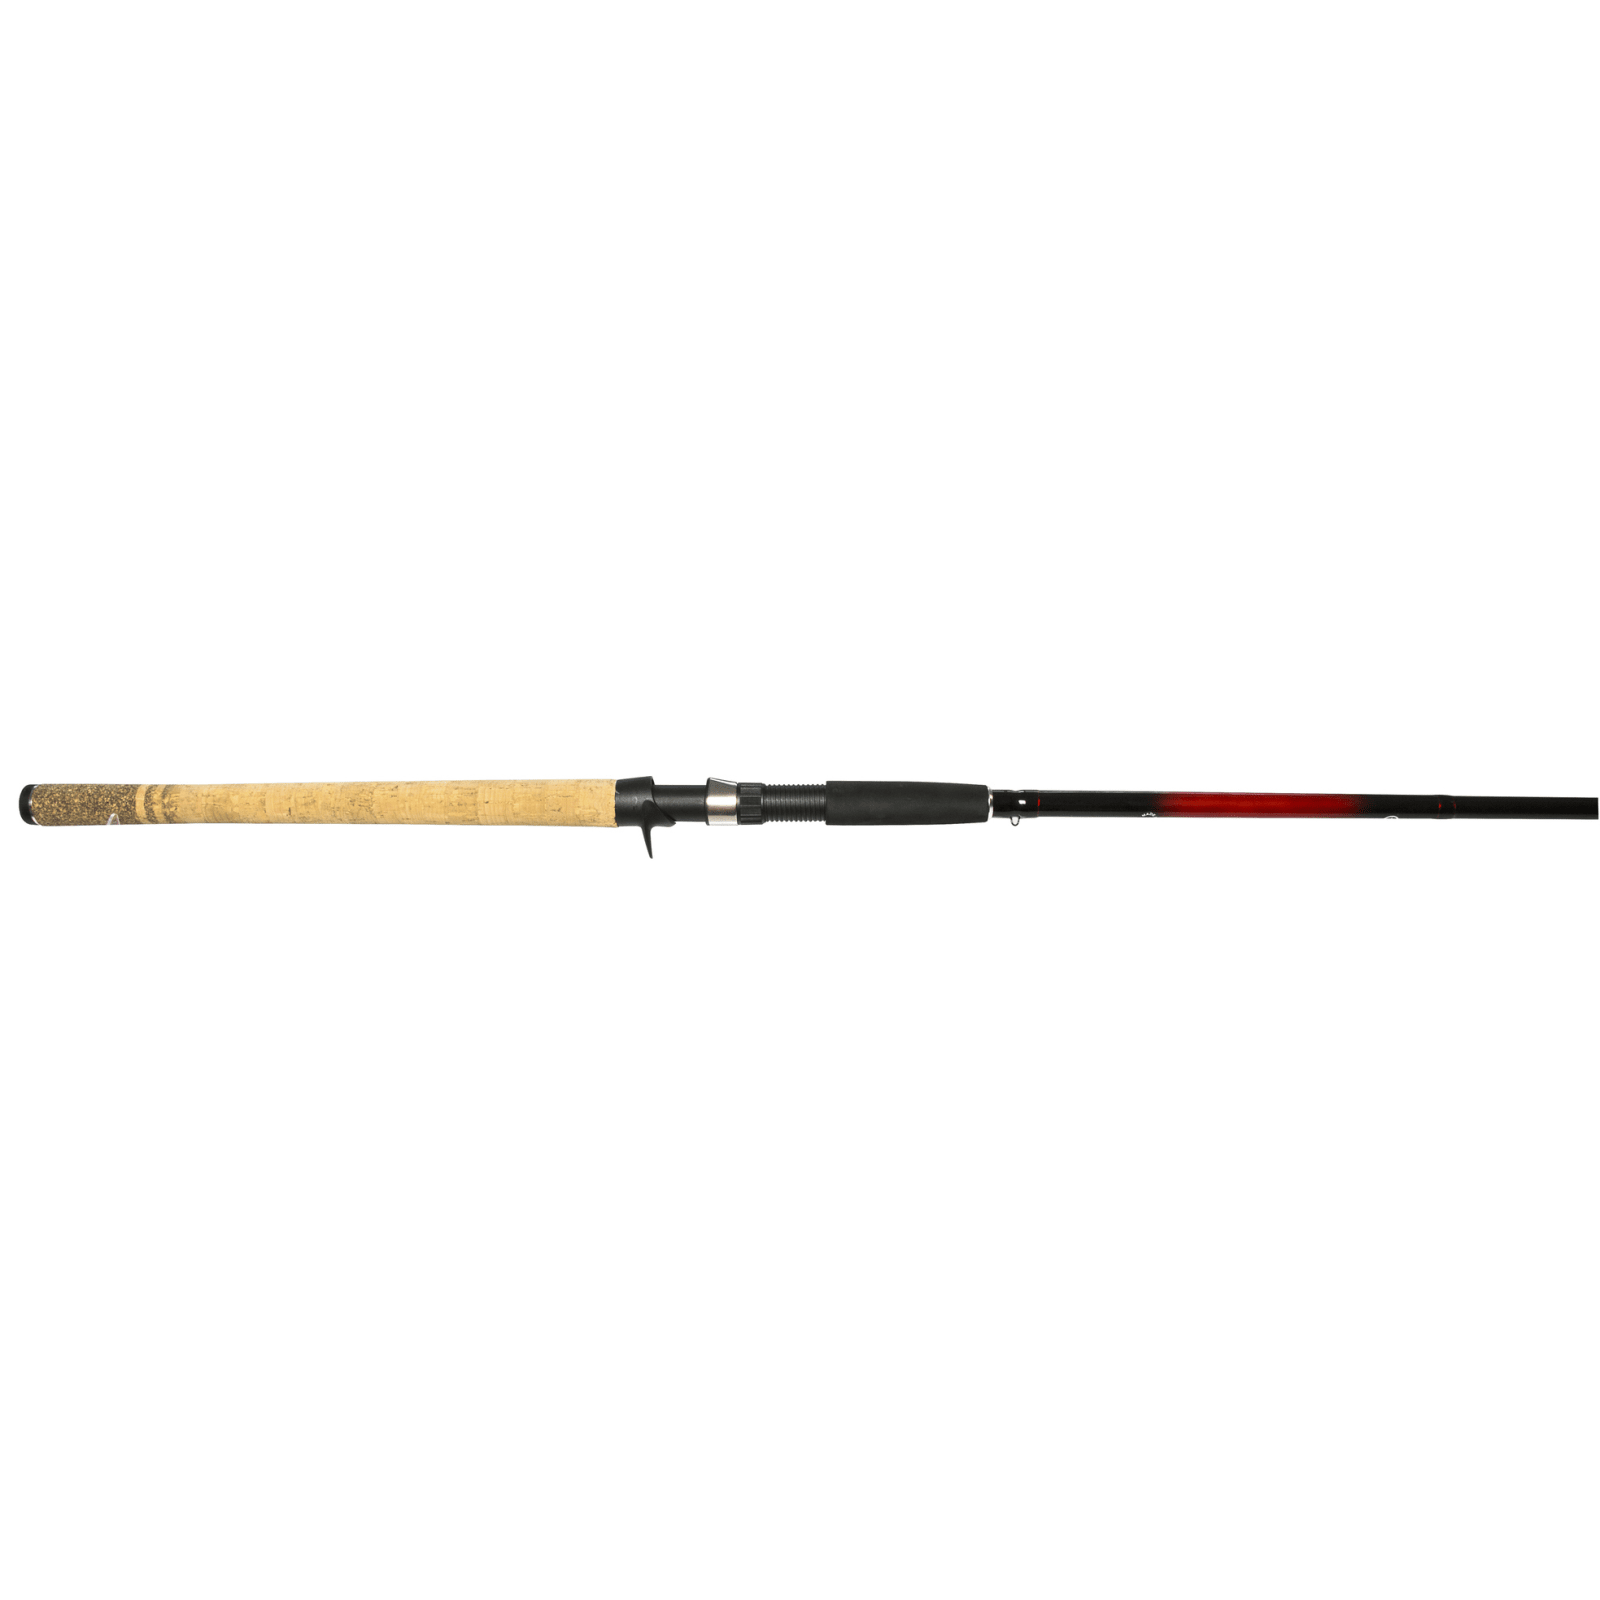 Sojourn Muskie Rod by Shimano at Fleet Farm